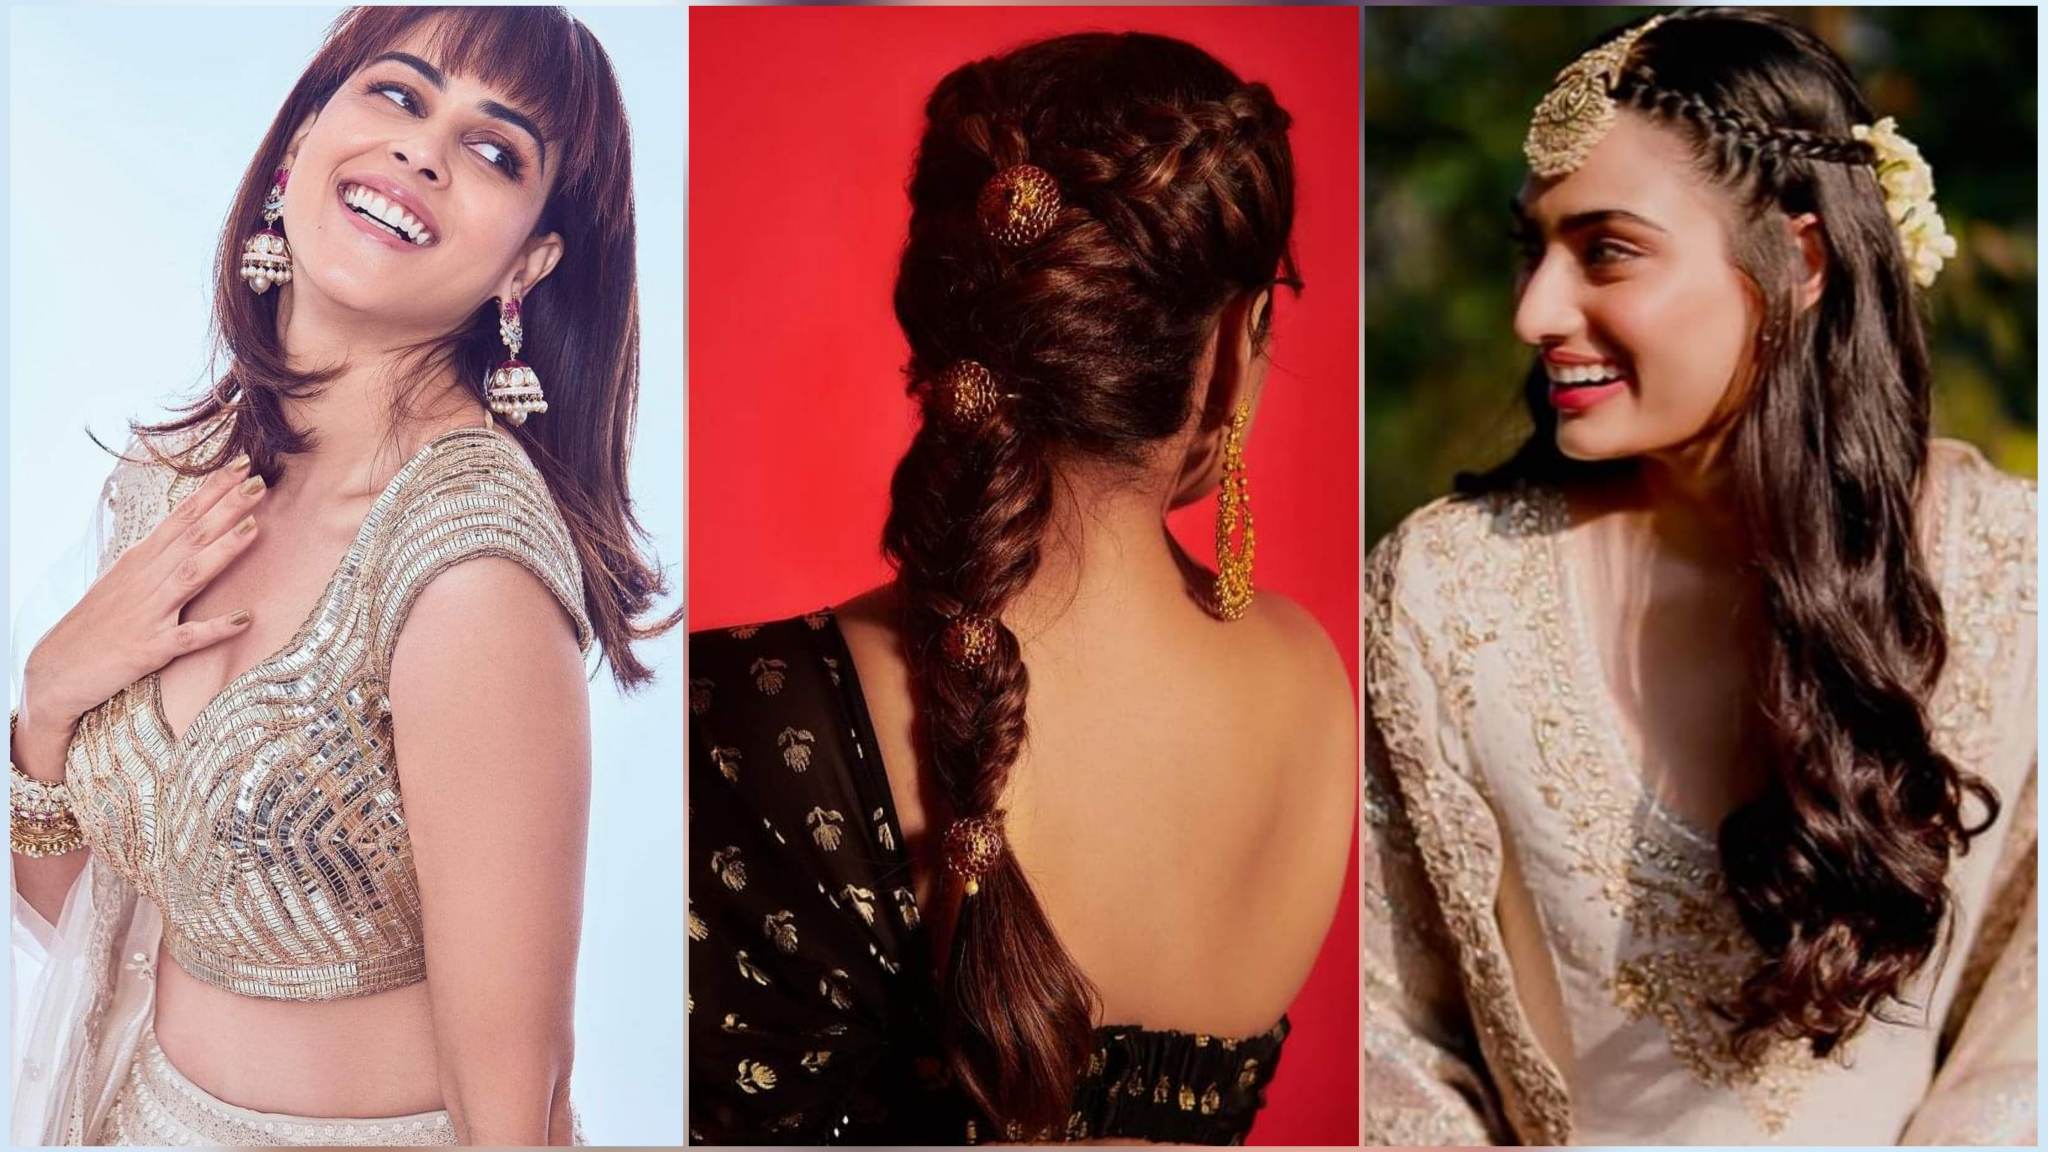 4 Cute and Easy Hairstyles For Lehenga | Open Hair Hairstyles - YouTube